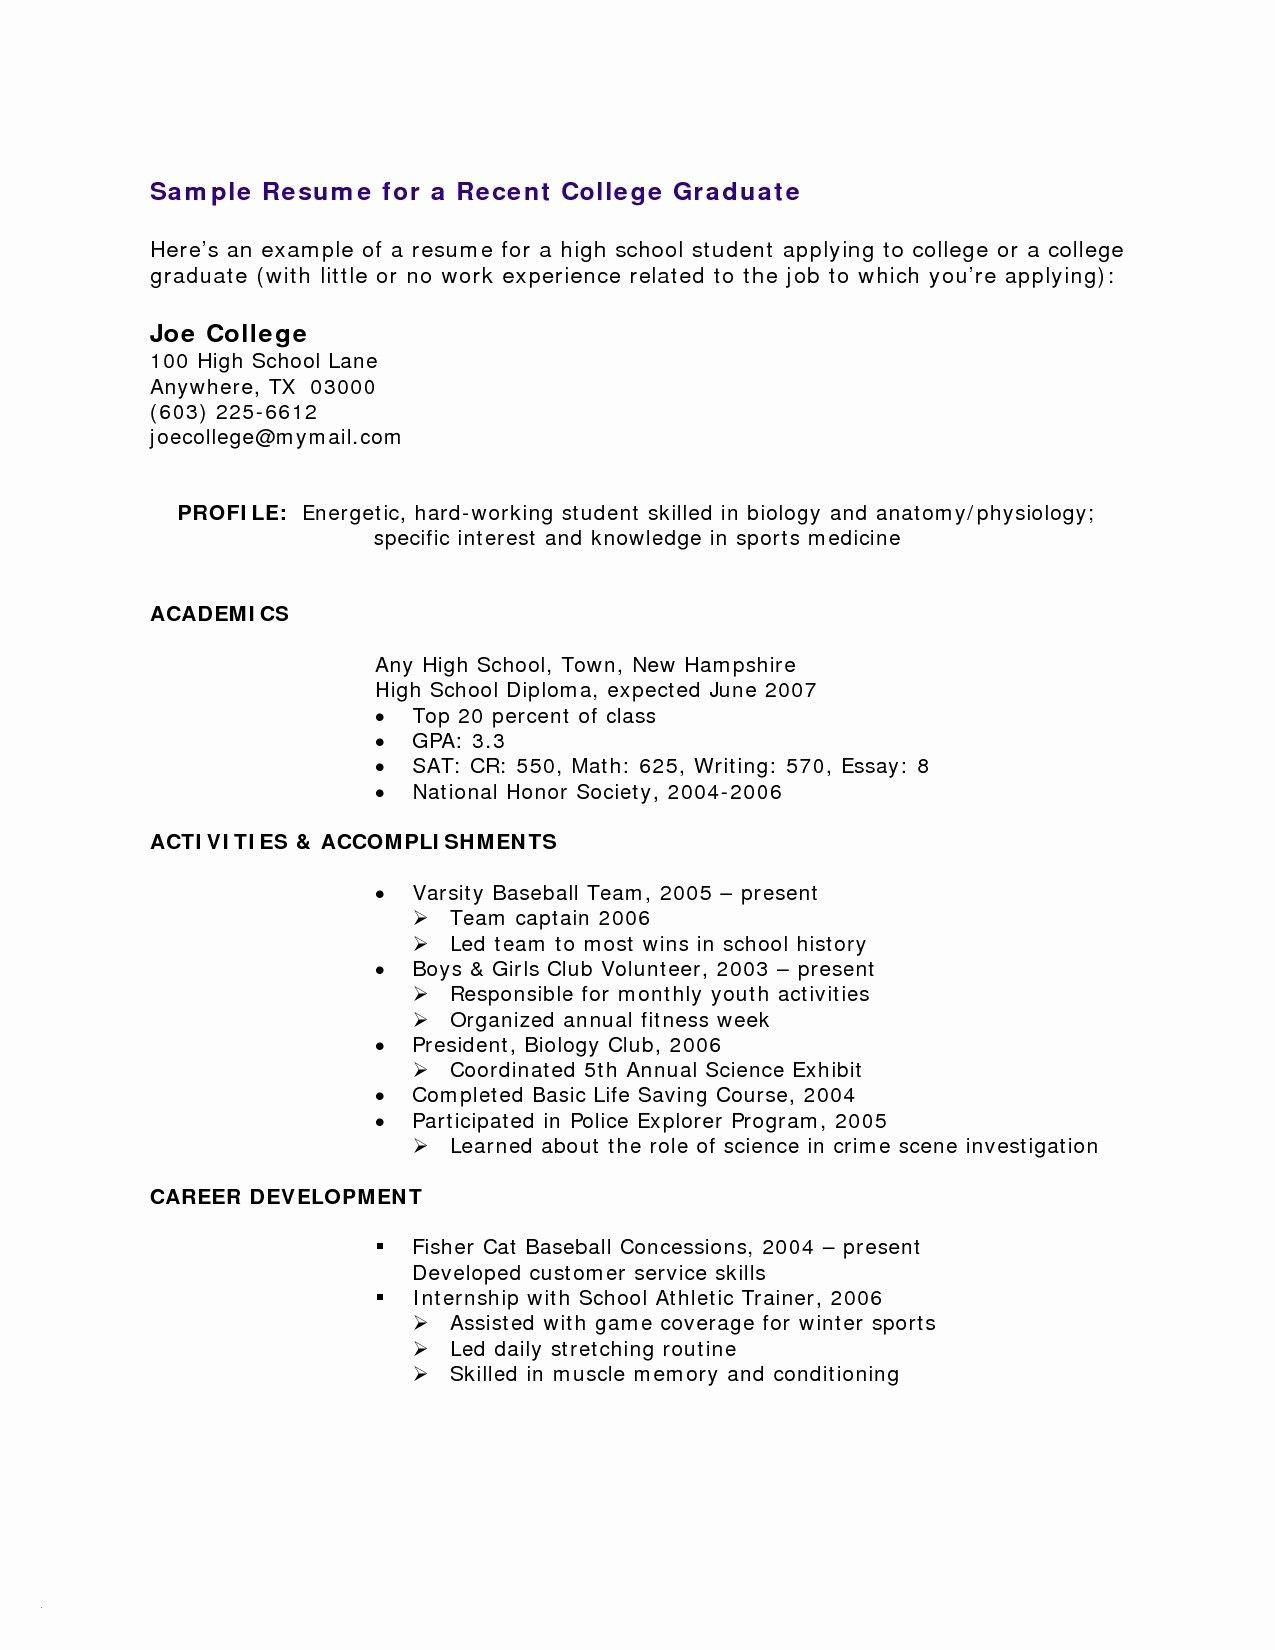 Sample Resume for College Student with No Job Experience Pin On Resume